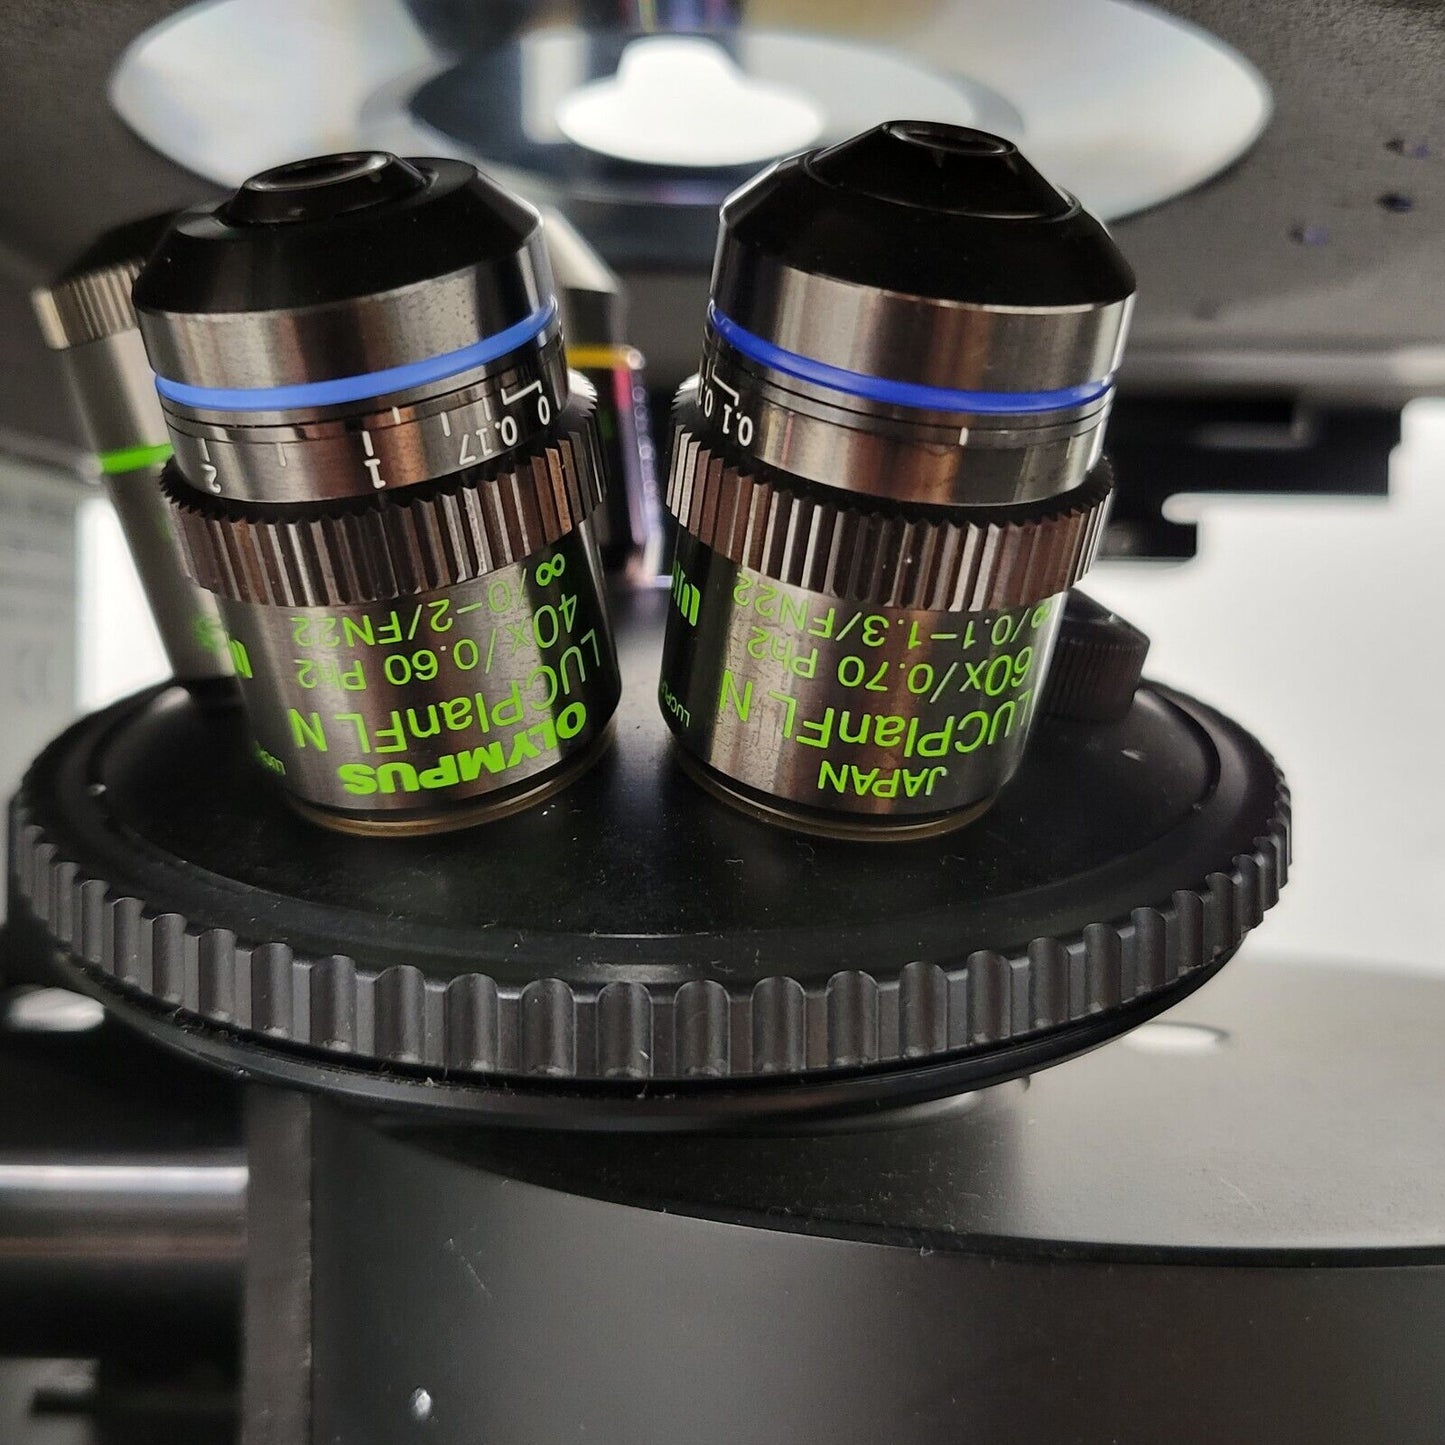 Olympus Microscope IX71 with Fluorites, Phase Contrast, and Fluorescence - microscopemarketplace